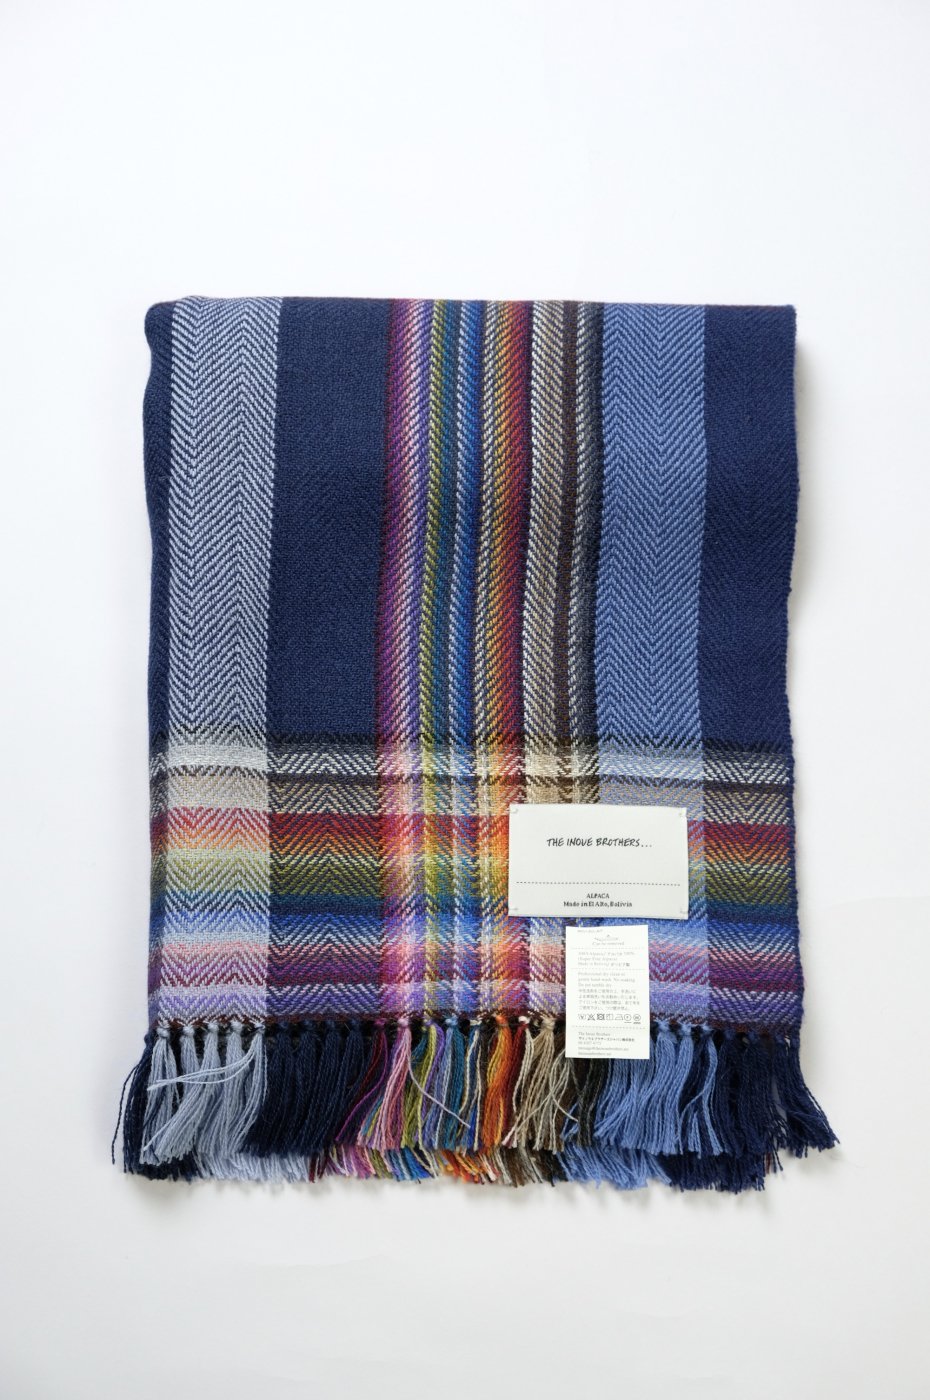 THE INOUE BROTHERS... "Multi Colored Scarf / NAVY"